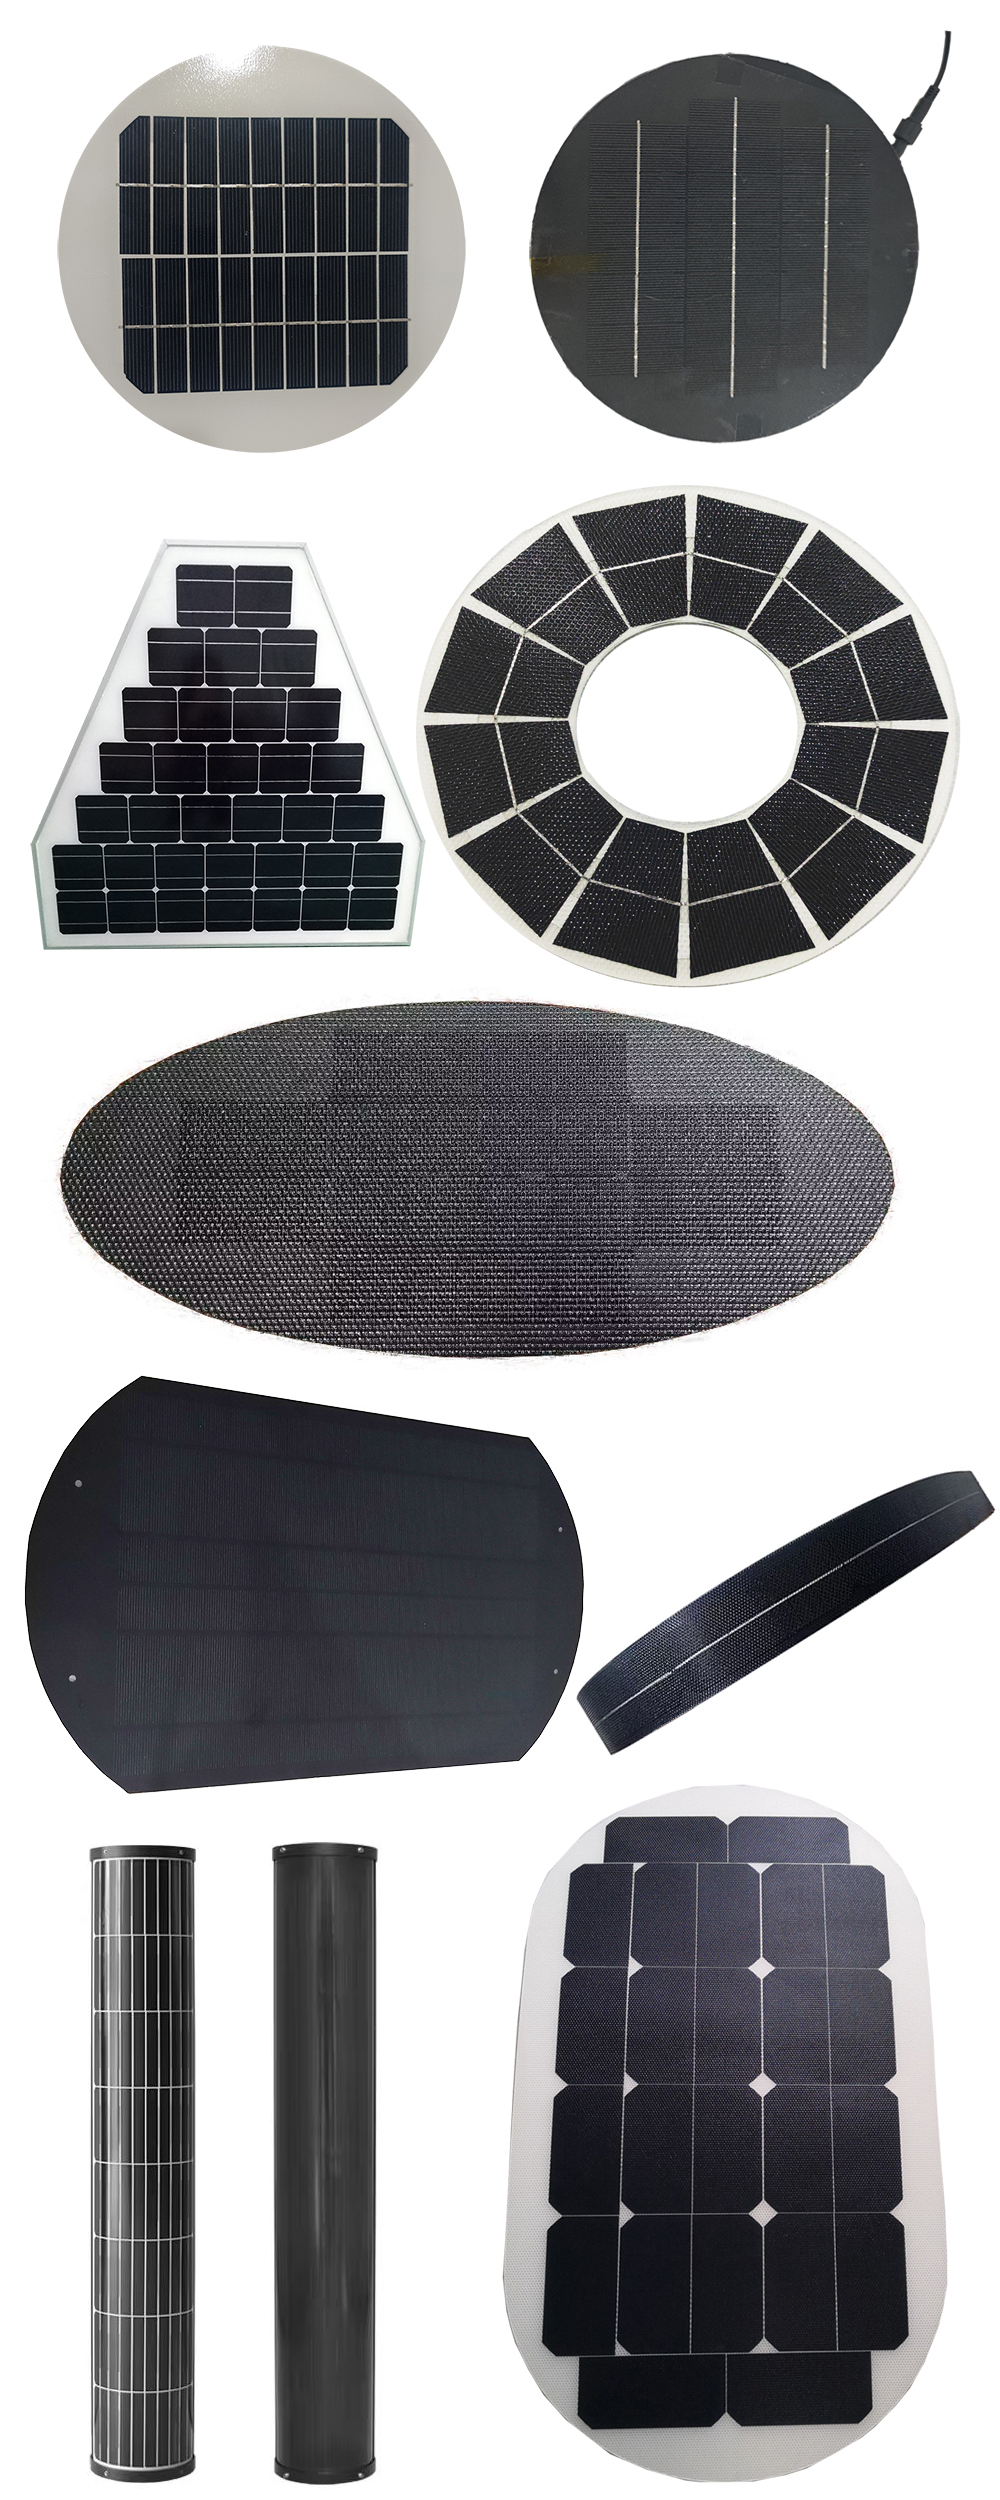  Customized OVAL shape solar panel examples